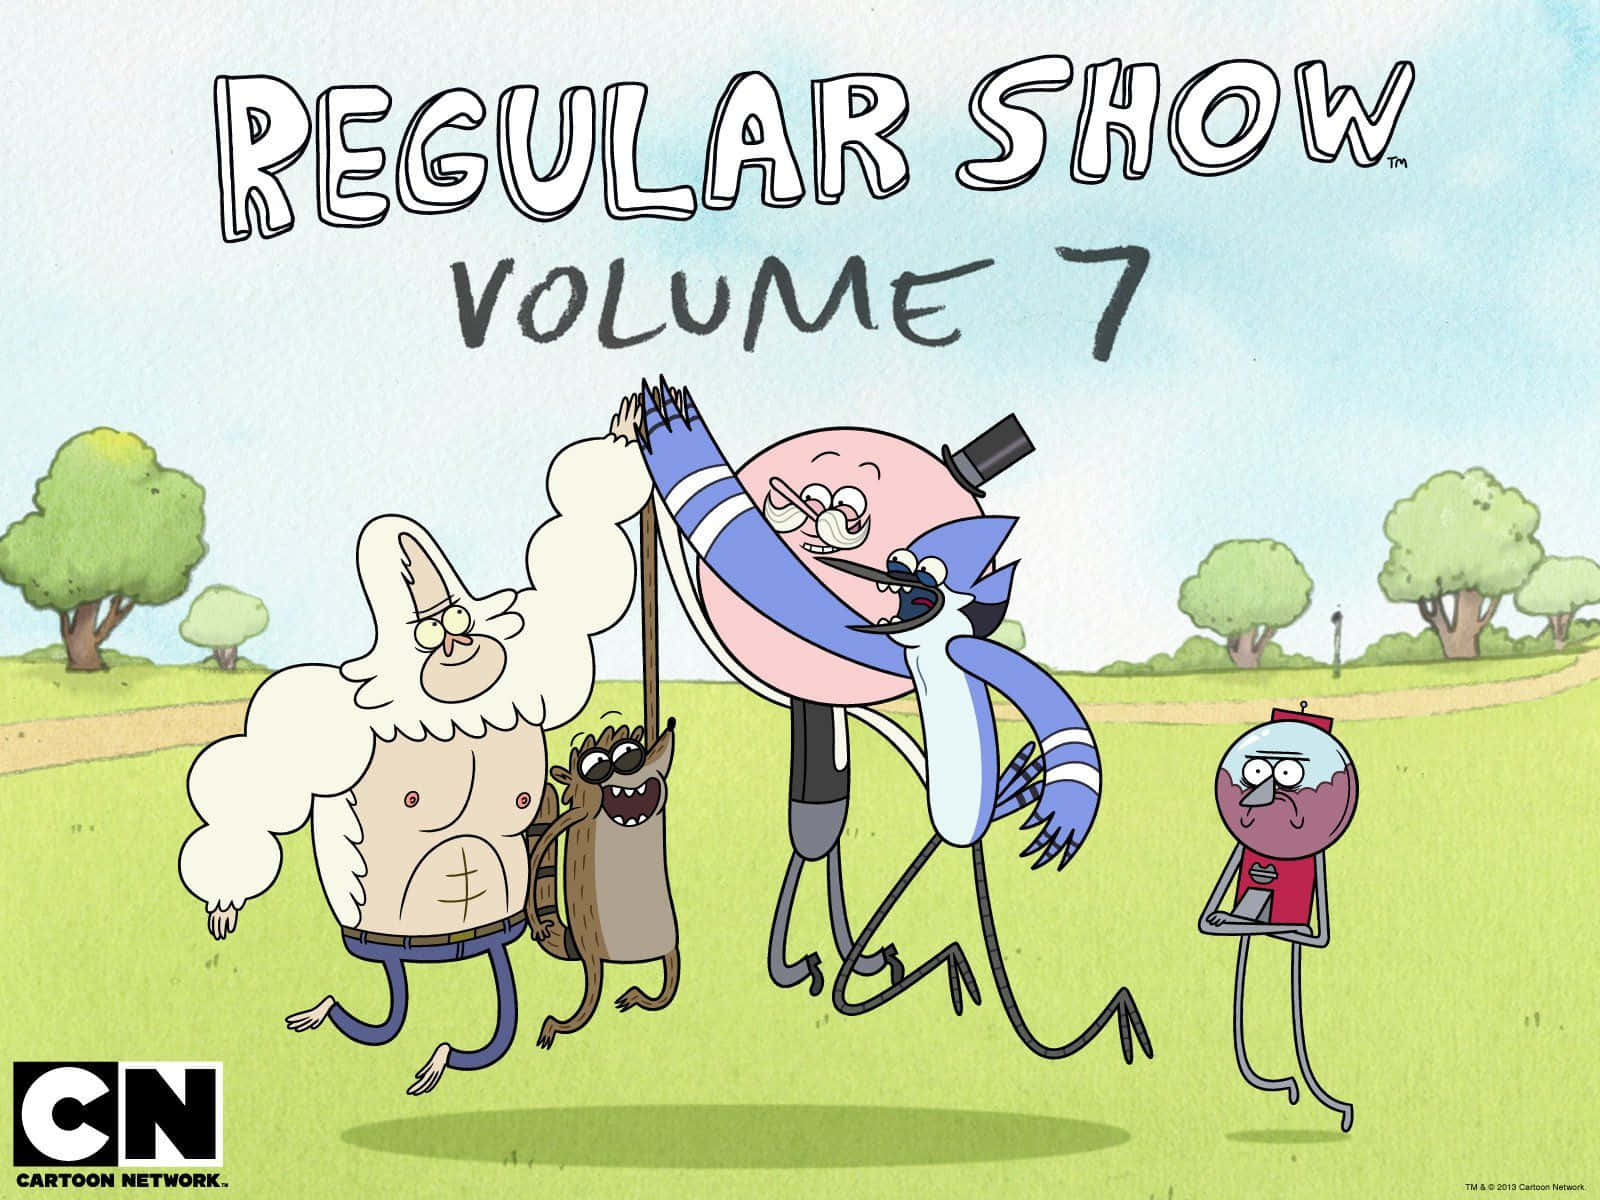 Mordecai and Rigby's Adventure in the Regular Show